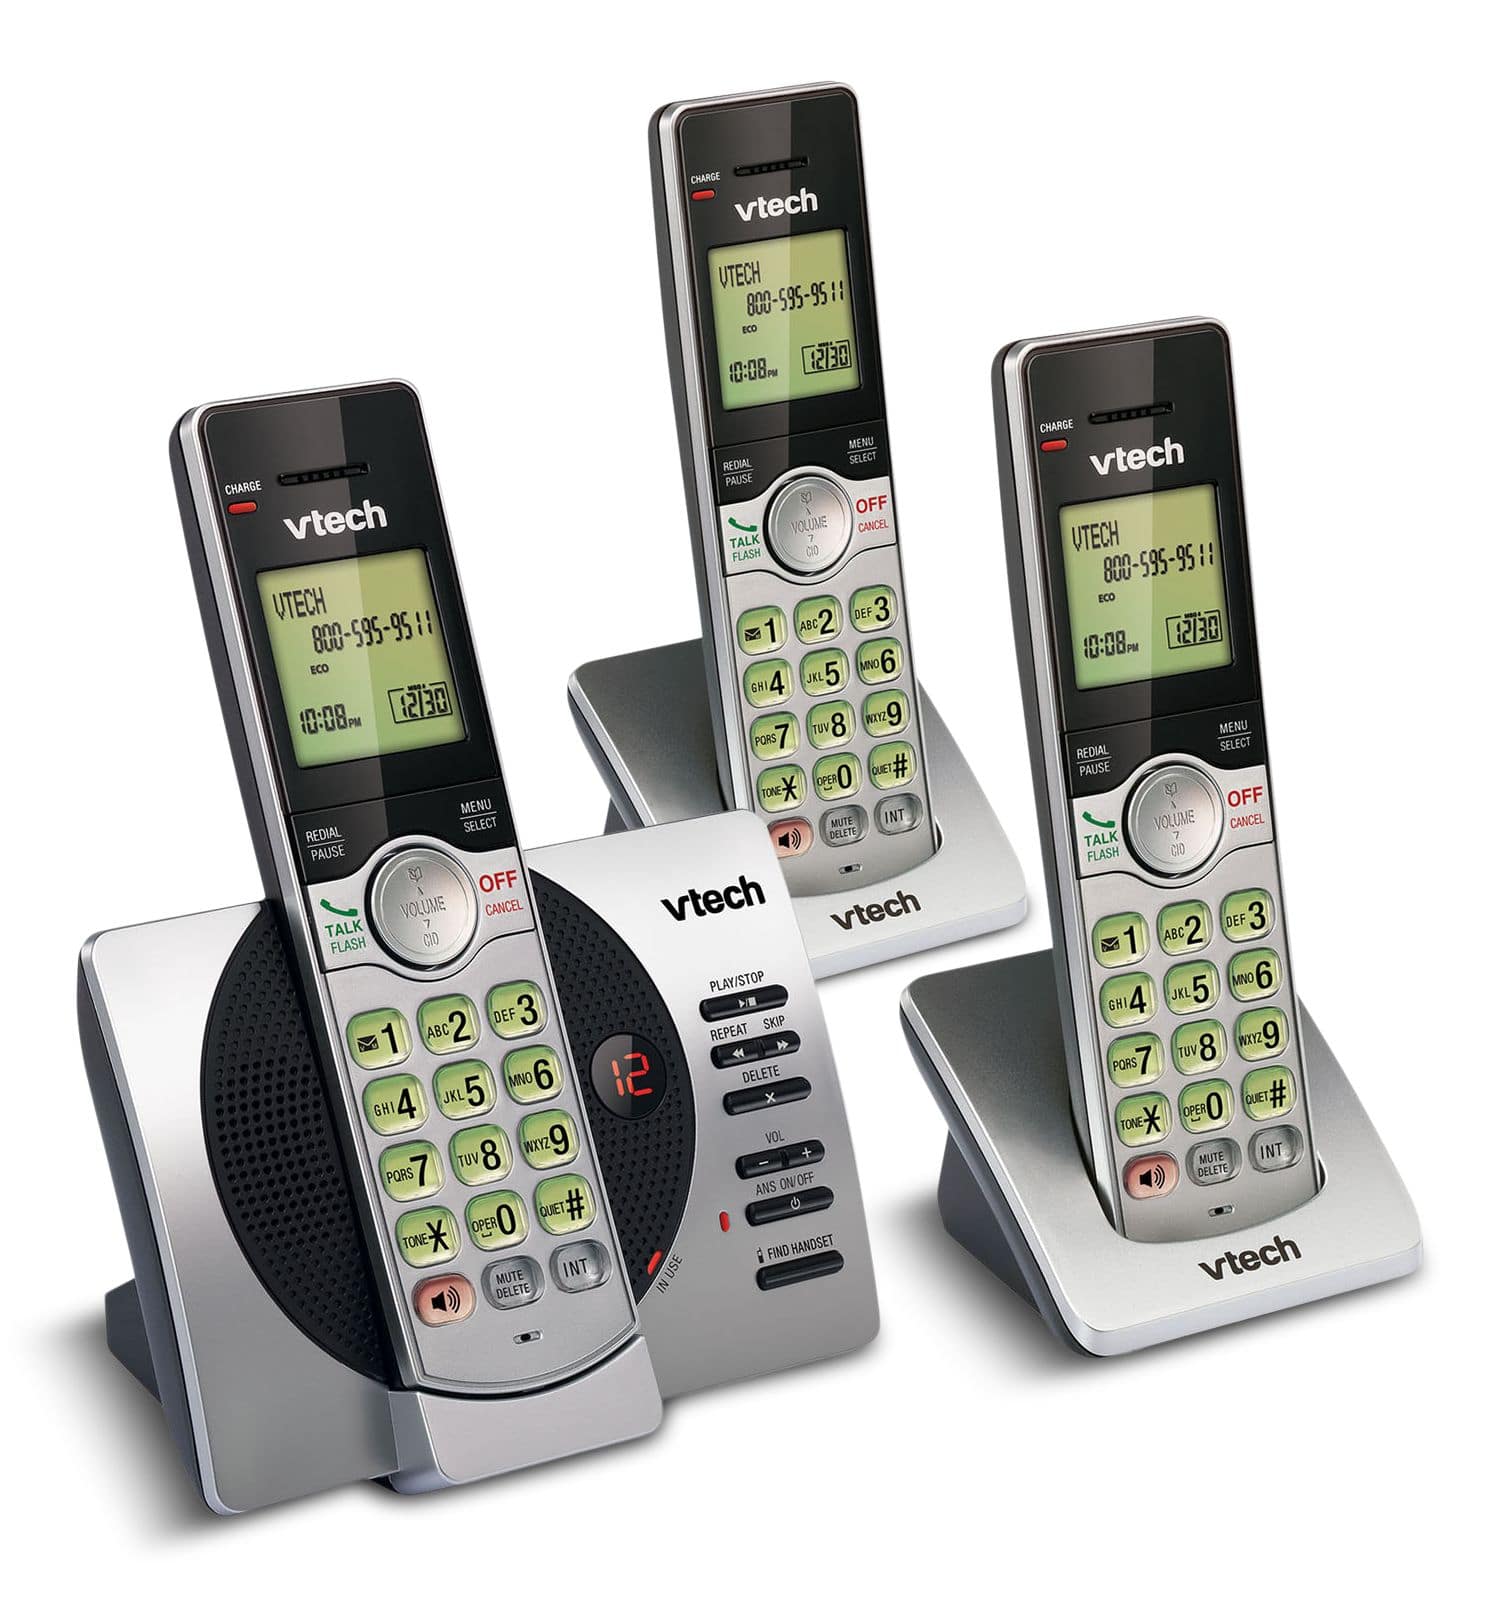 VTech DECT 6.0 Cordless Phones with Digital Answering System, 3 Handsets,  Silver/Black